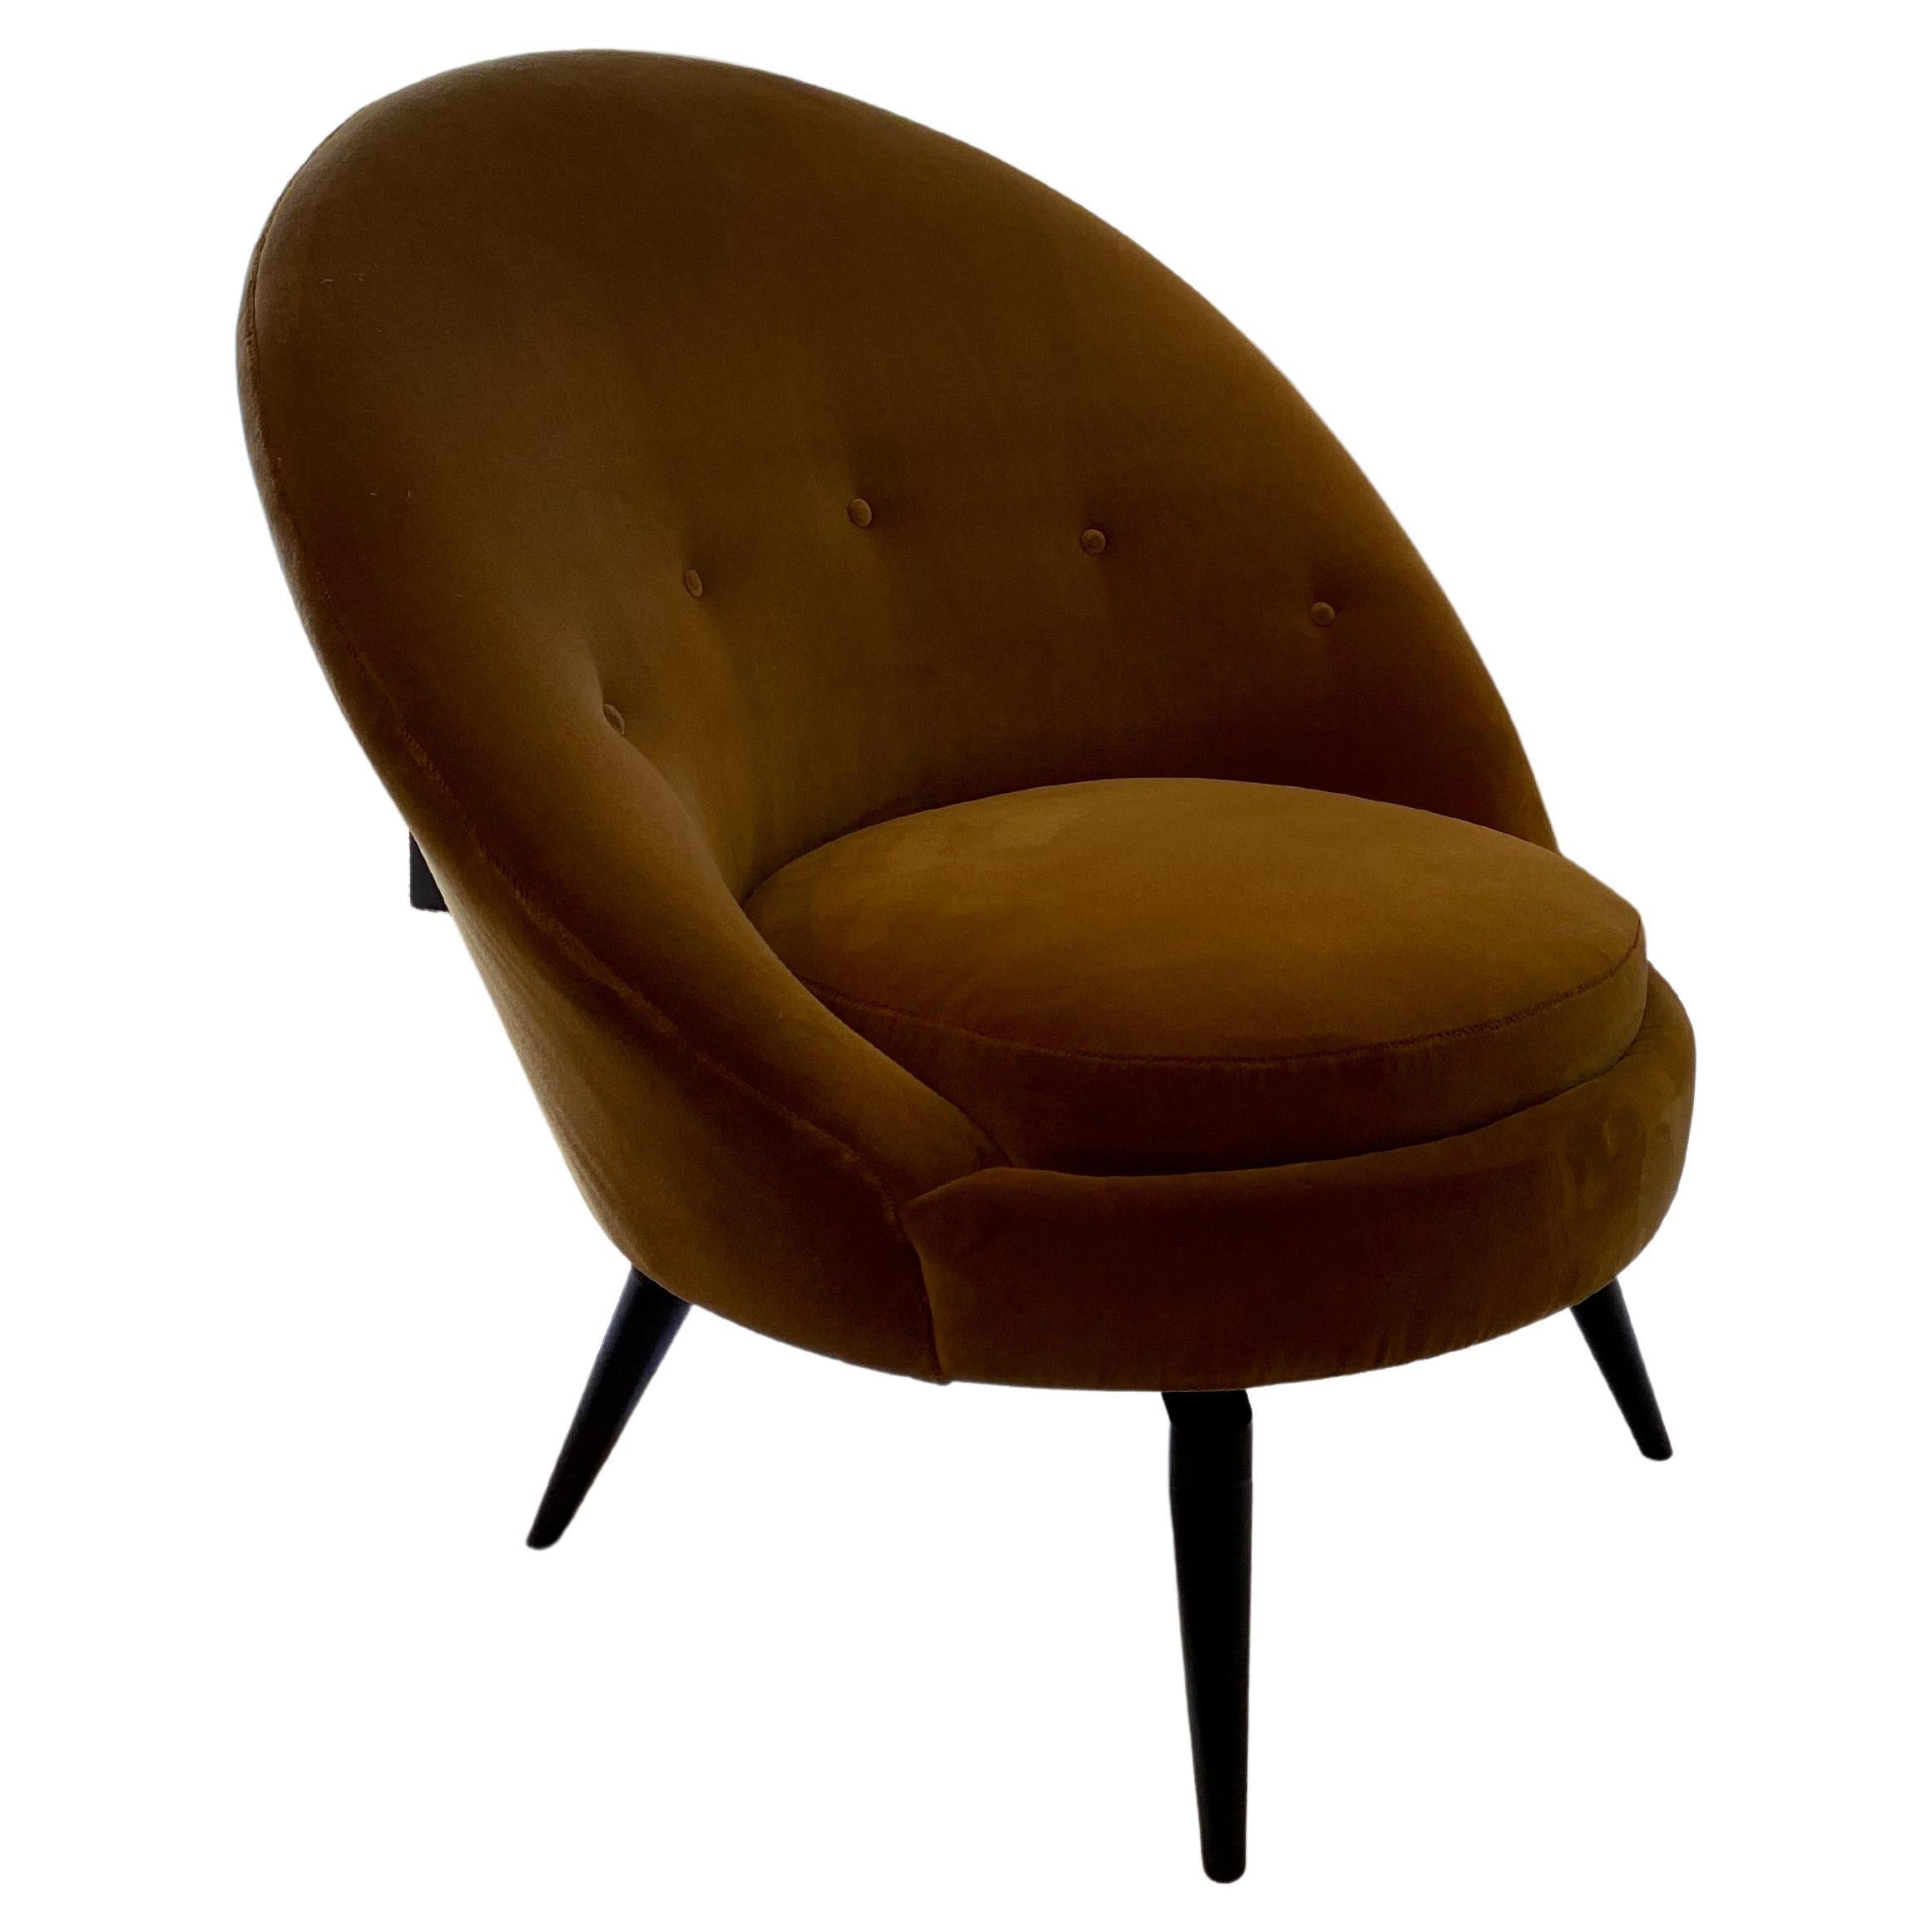 Swivel Egg chairs in the French Midcentury style. This sophisticated chair is upholstered in luxurious heavy weight, backed Mustard gold faux Mohair. This super stylish and versatile example is as comfortable as it looks and is painstakingly